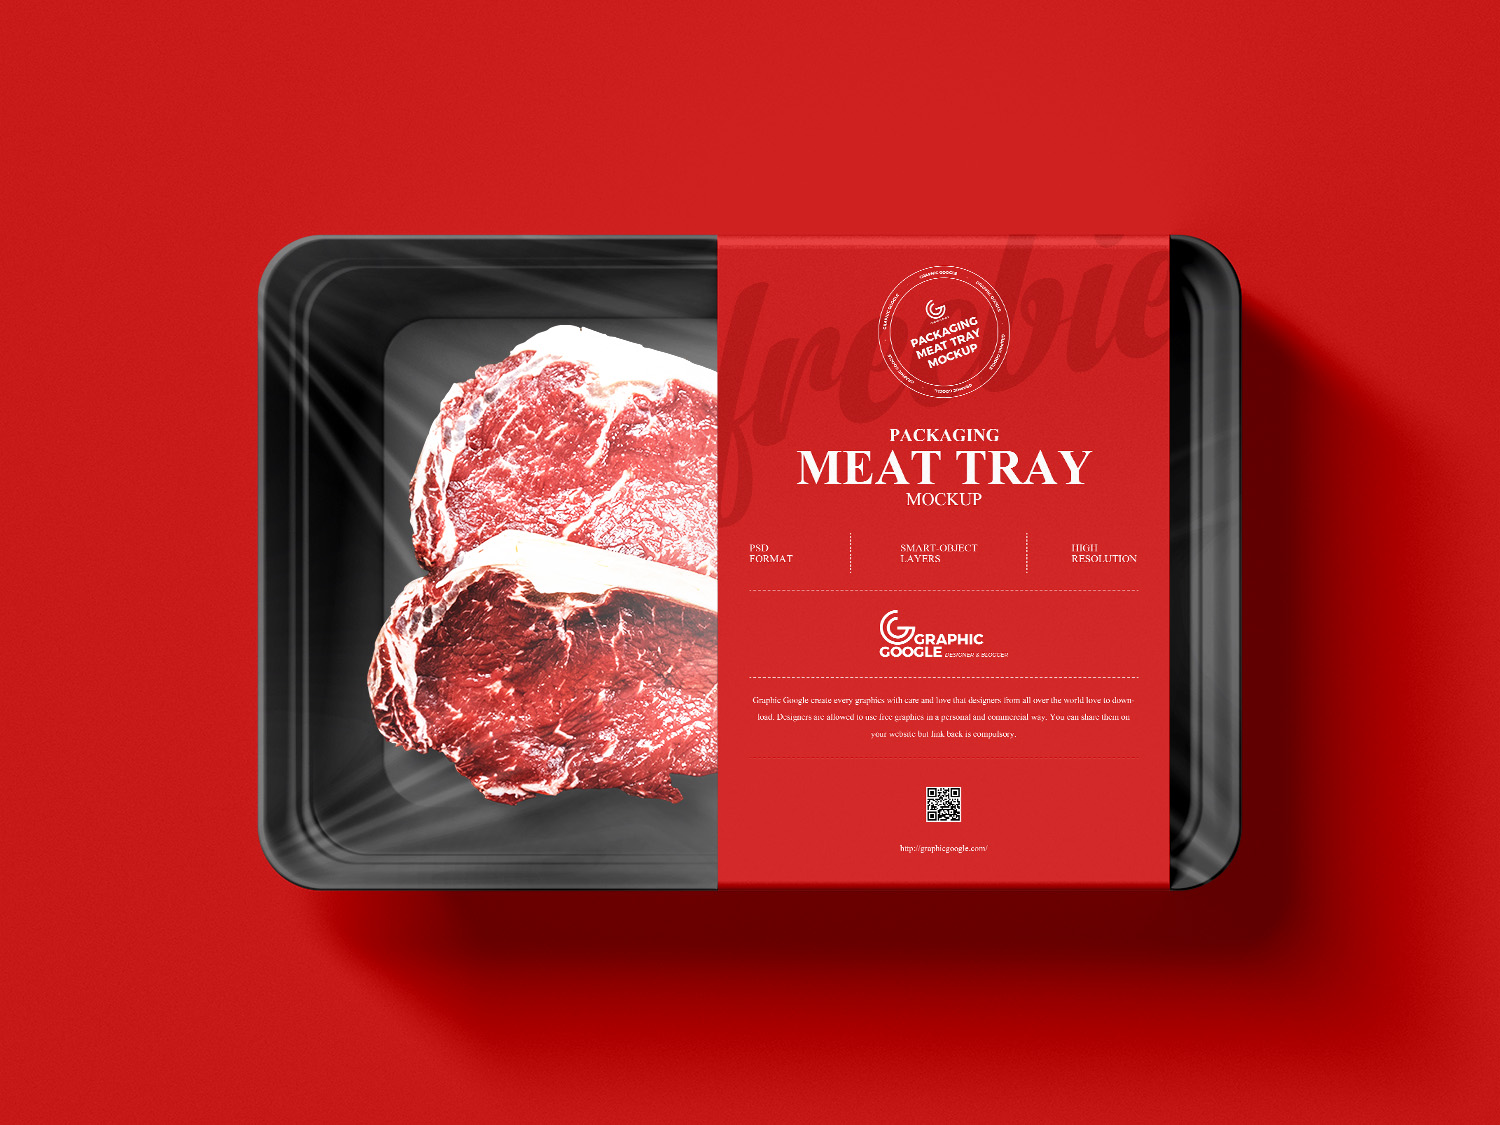 Packaging Meat Tray Mockup